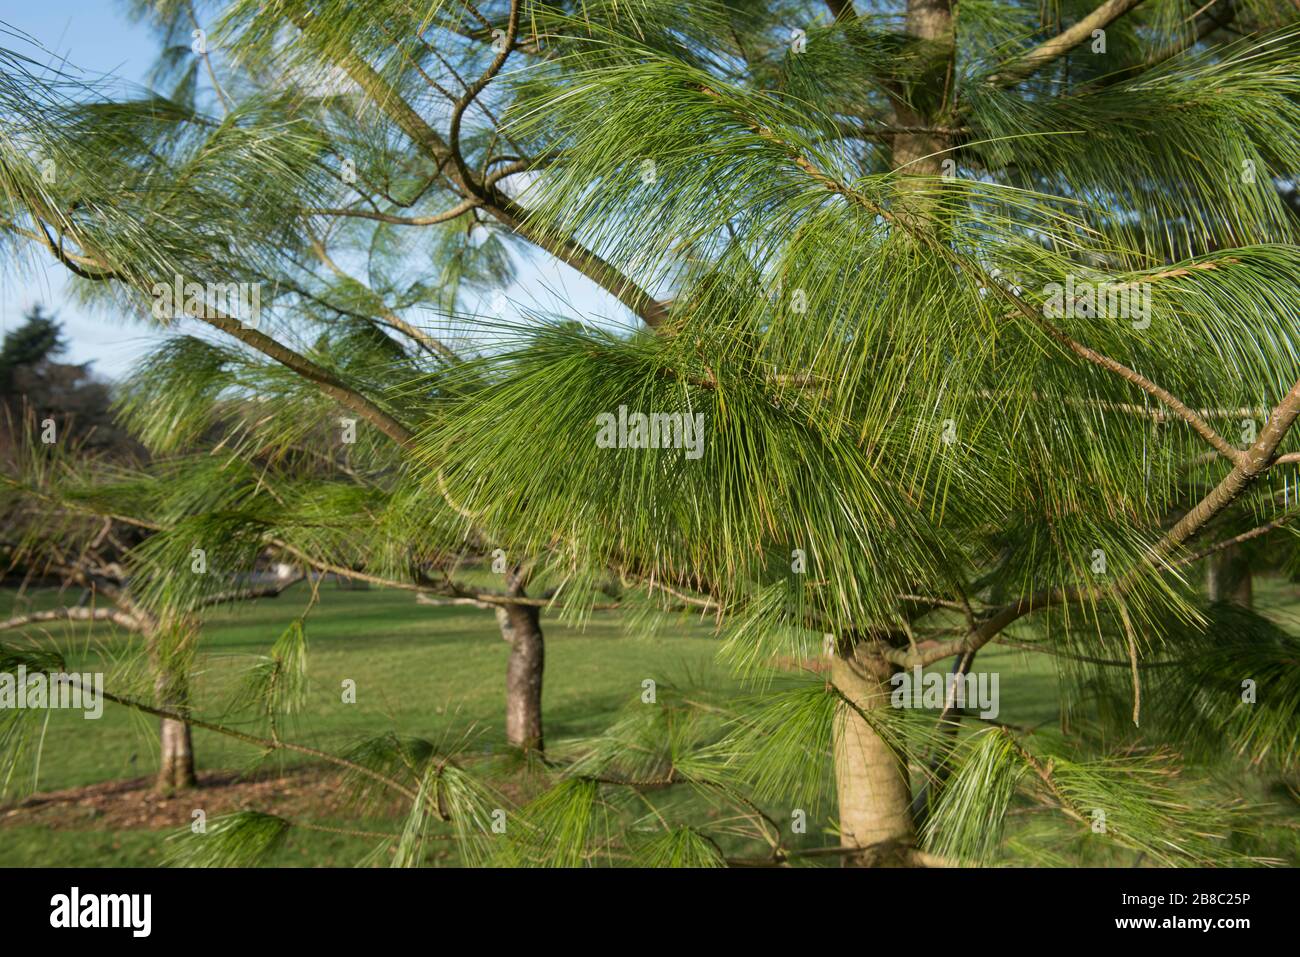 Green Foliage of an Evergreen Holford Pine Tree (Pinus x holfordiana) with a Bright Blue Sky Background in a Garden in Rural Devon, England, UK Stock Photo